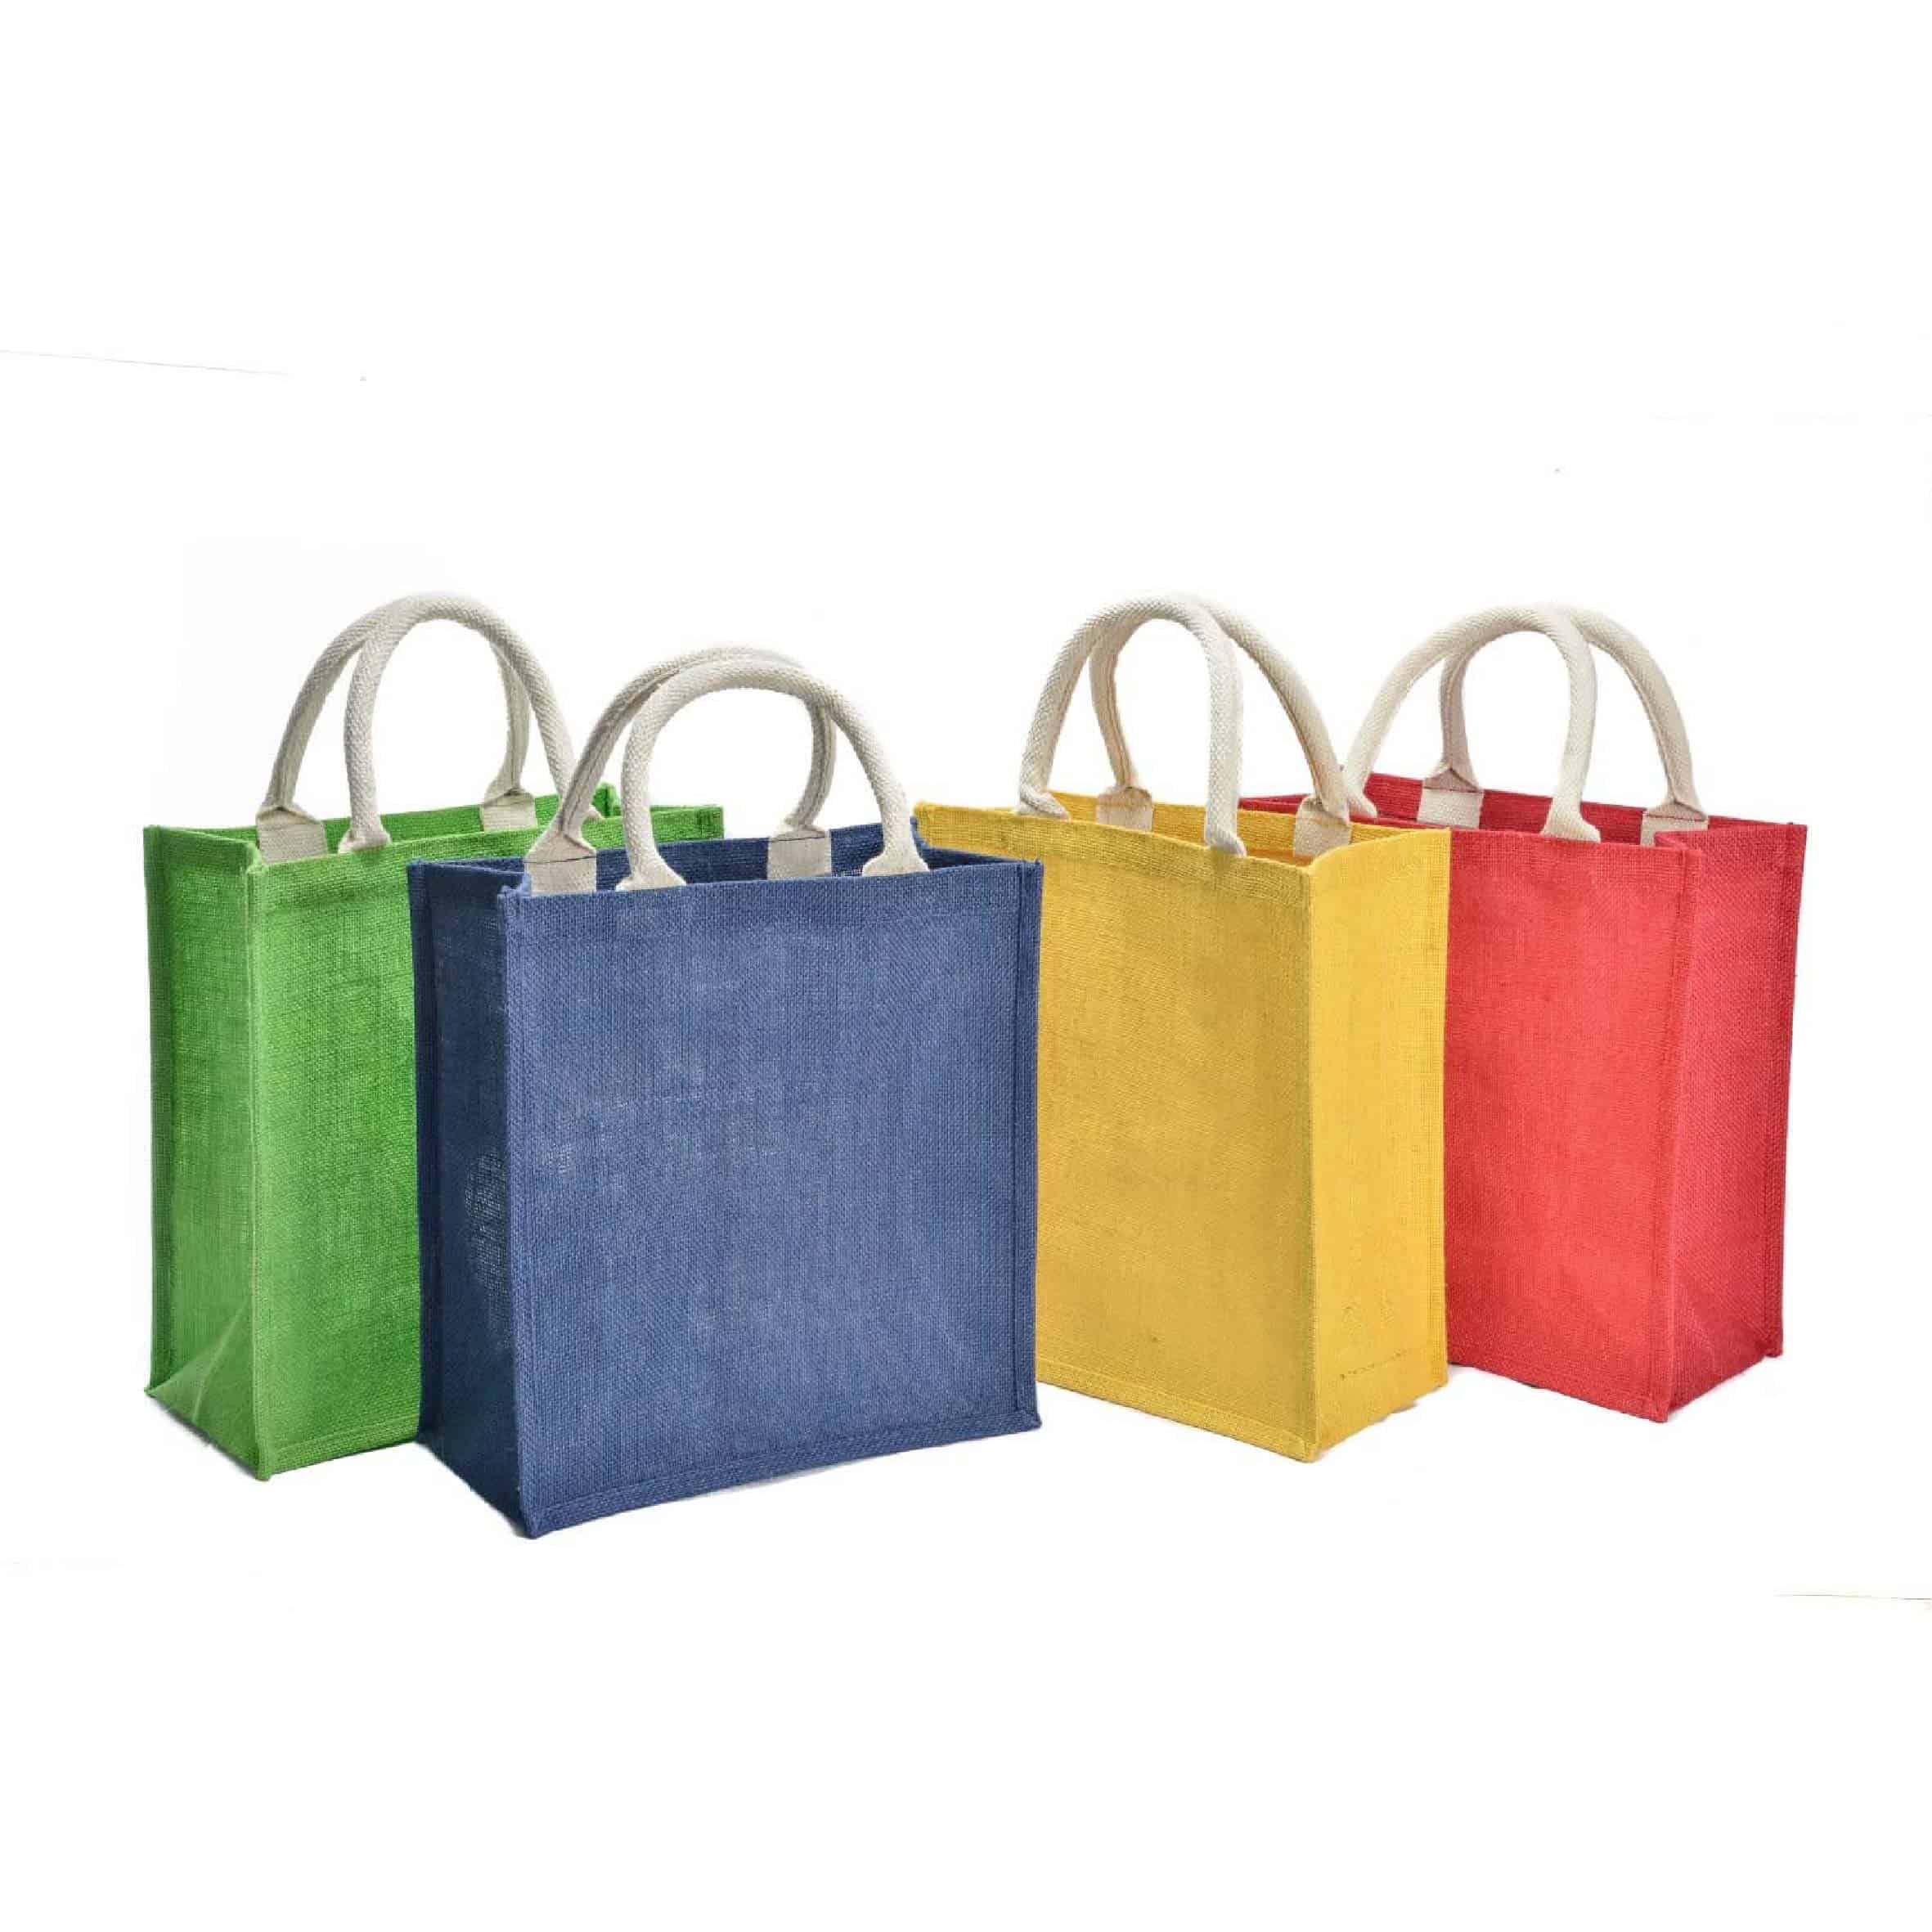 Jute Bags Malaysia by SJ-World Gifts Malaysia Trusted Corporate Gift Supplier